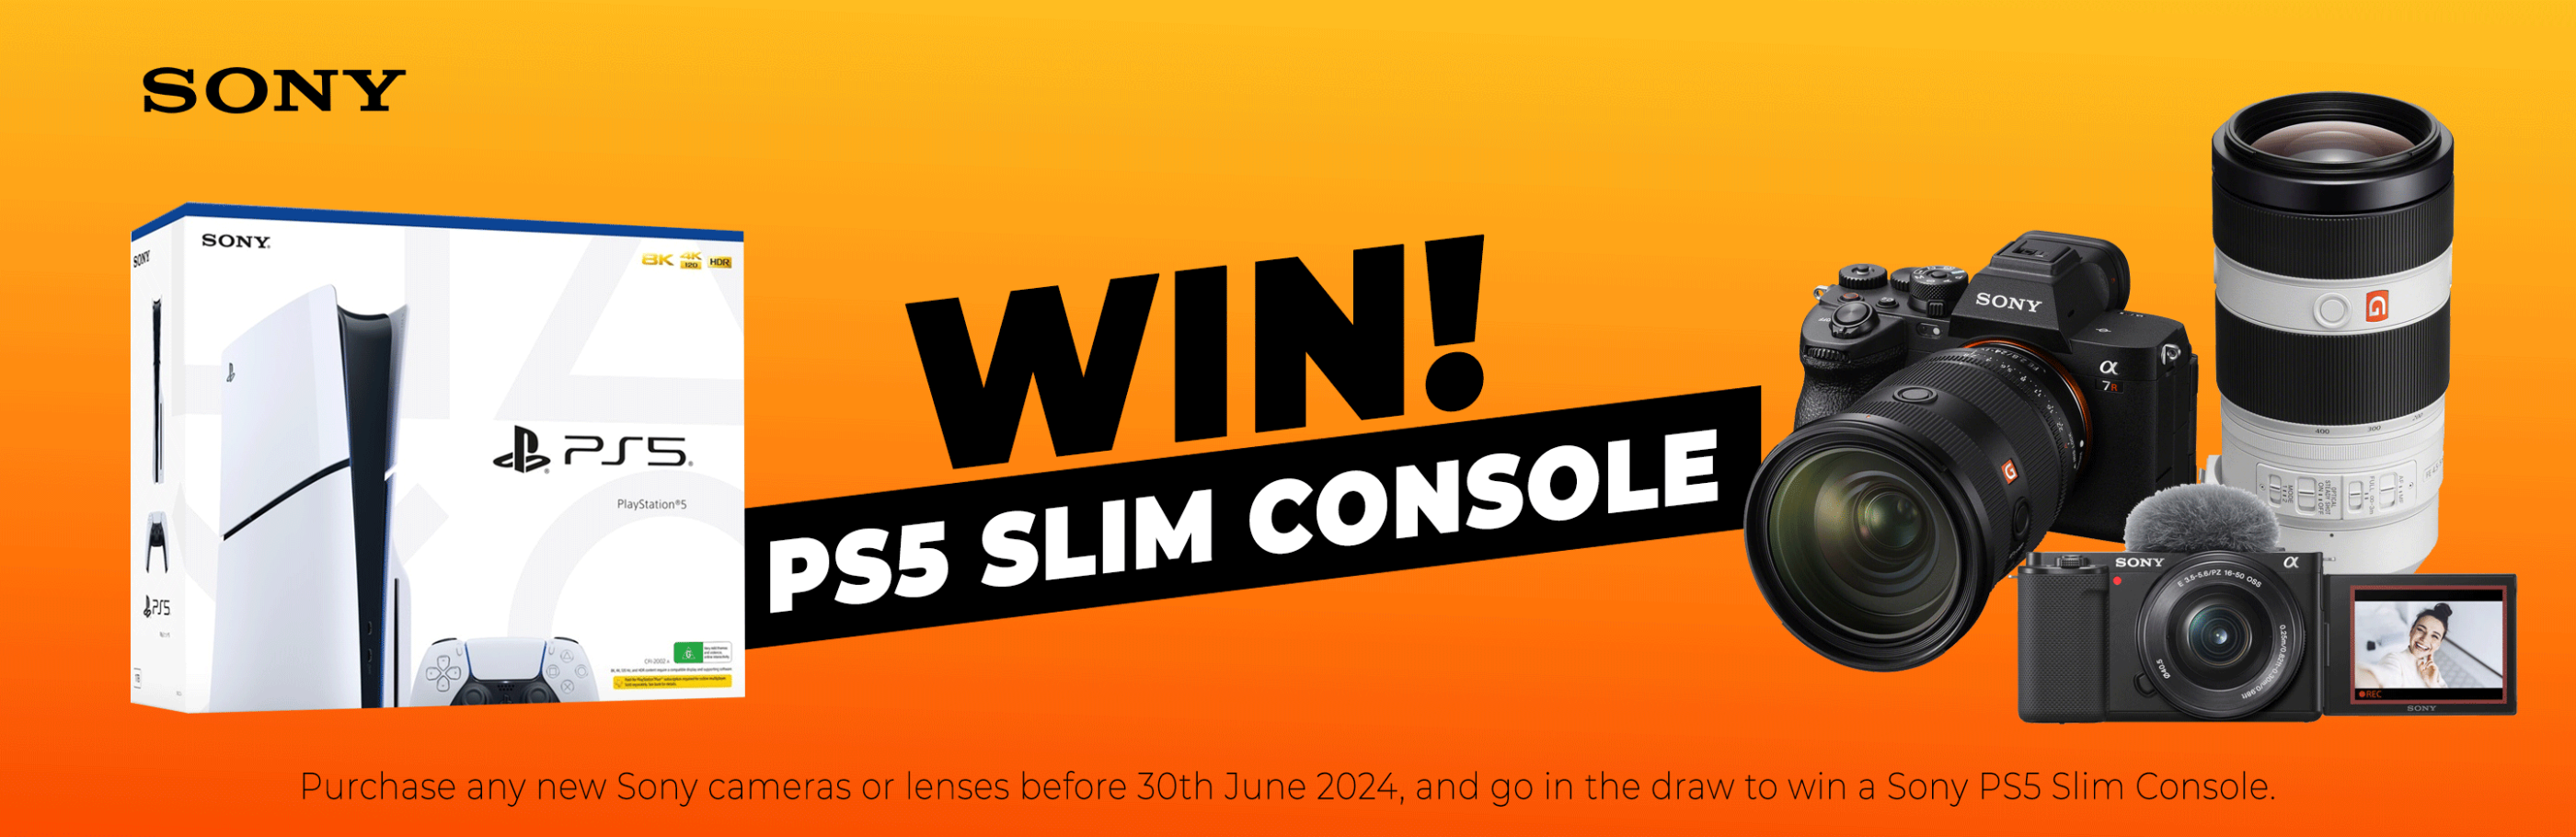 Win a PS5 Slim Console with Sony!